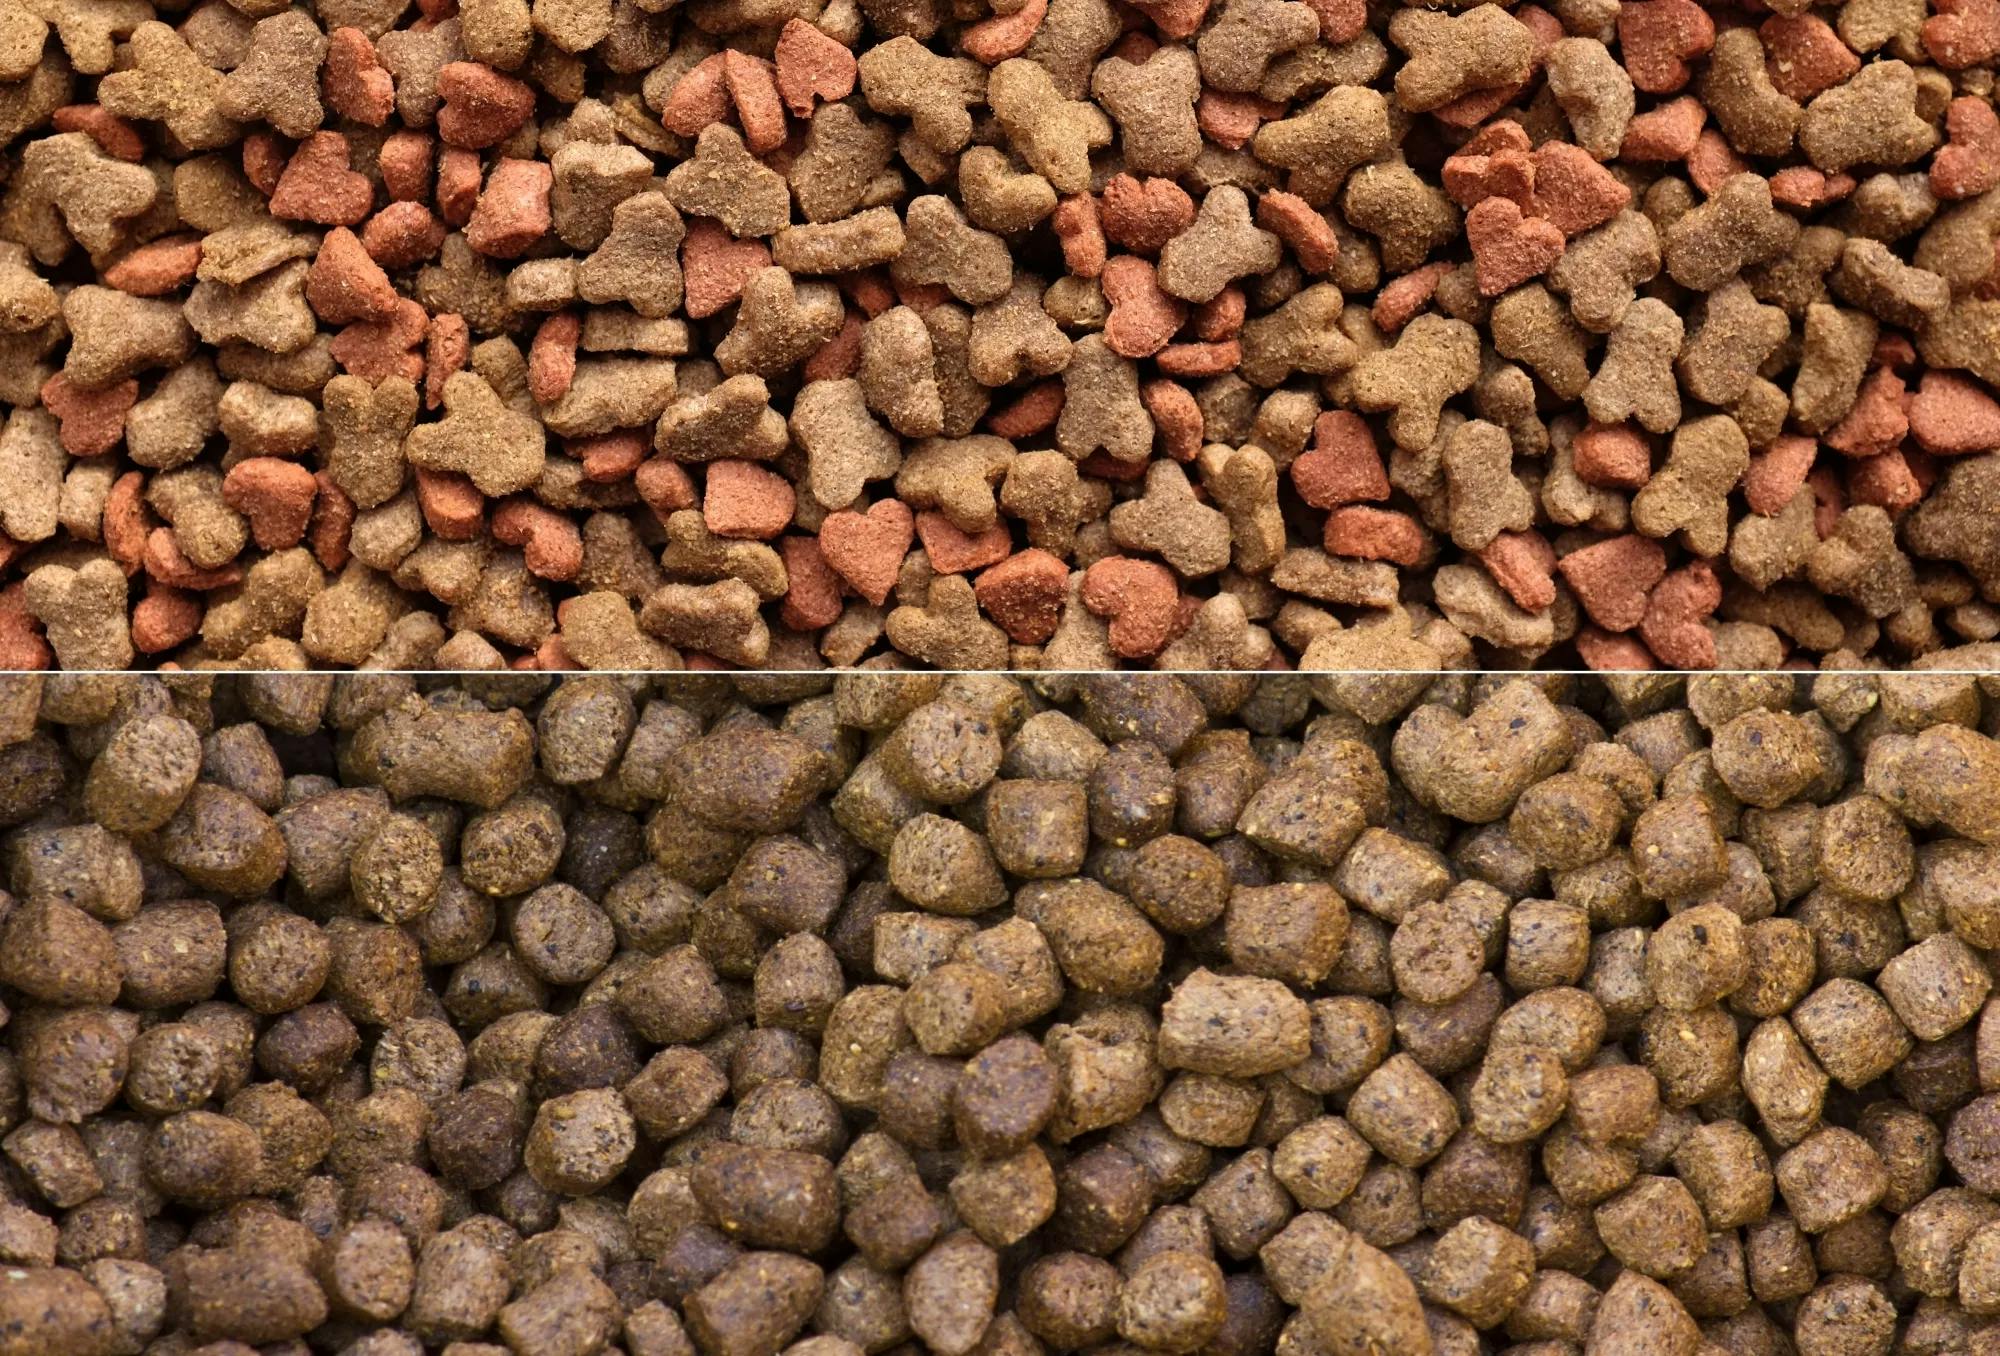 Pet food above and animal feed below mirroring each other